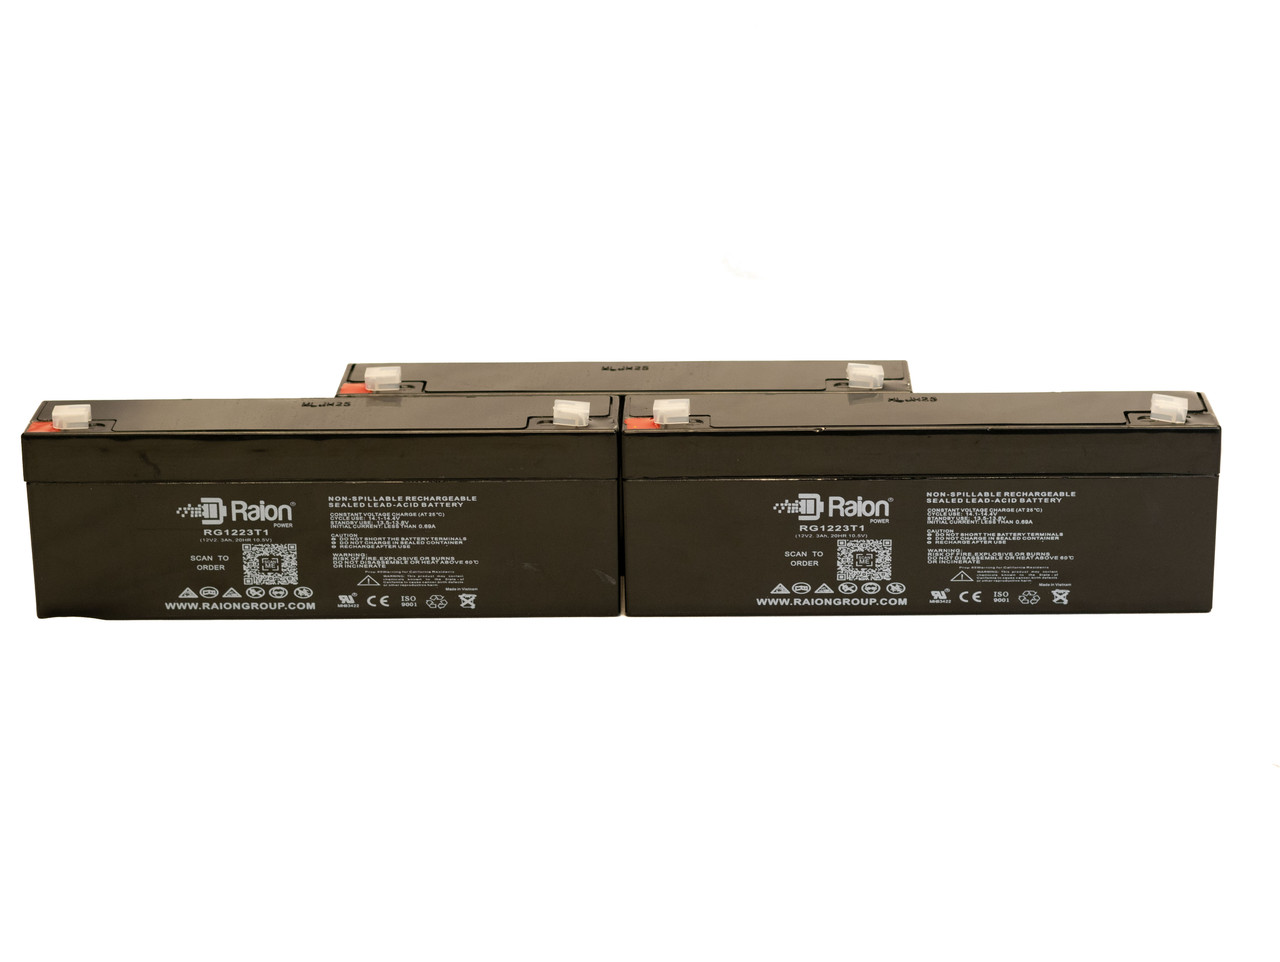 Raion Power 12V 2.3Ah RG1223T1 Replacement Medical Battery for Clary UPS1400-VA1G - 3 Pack